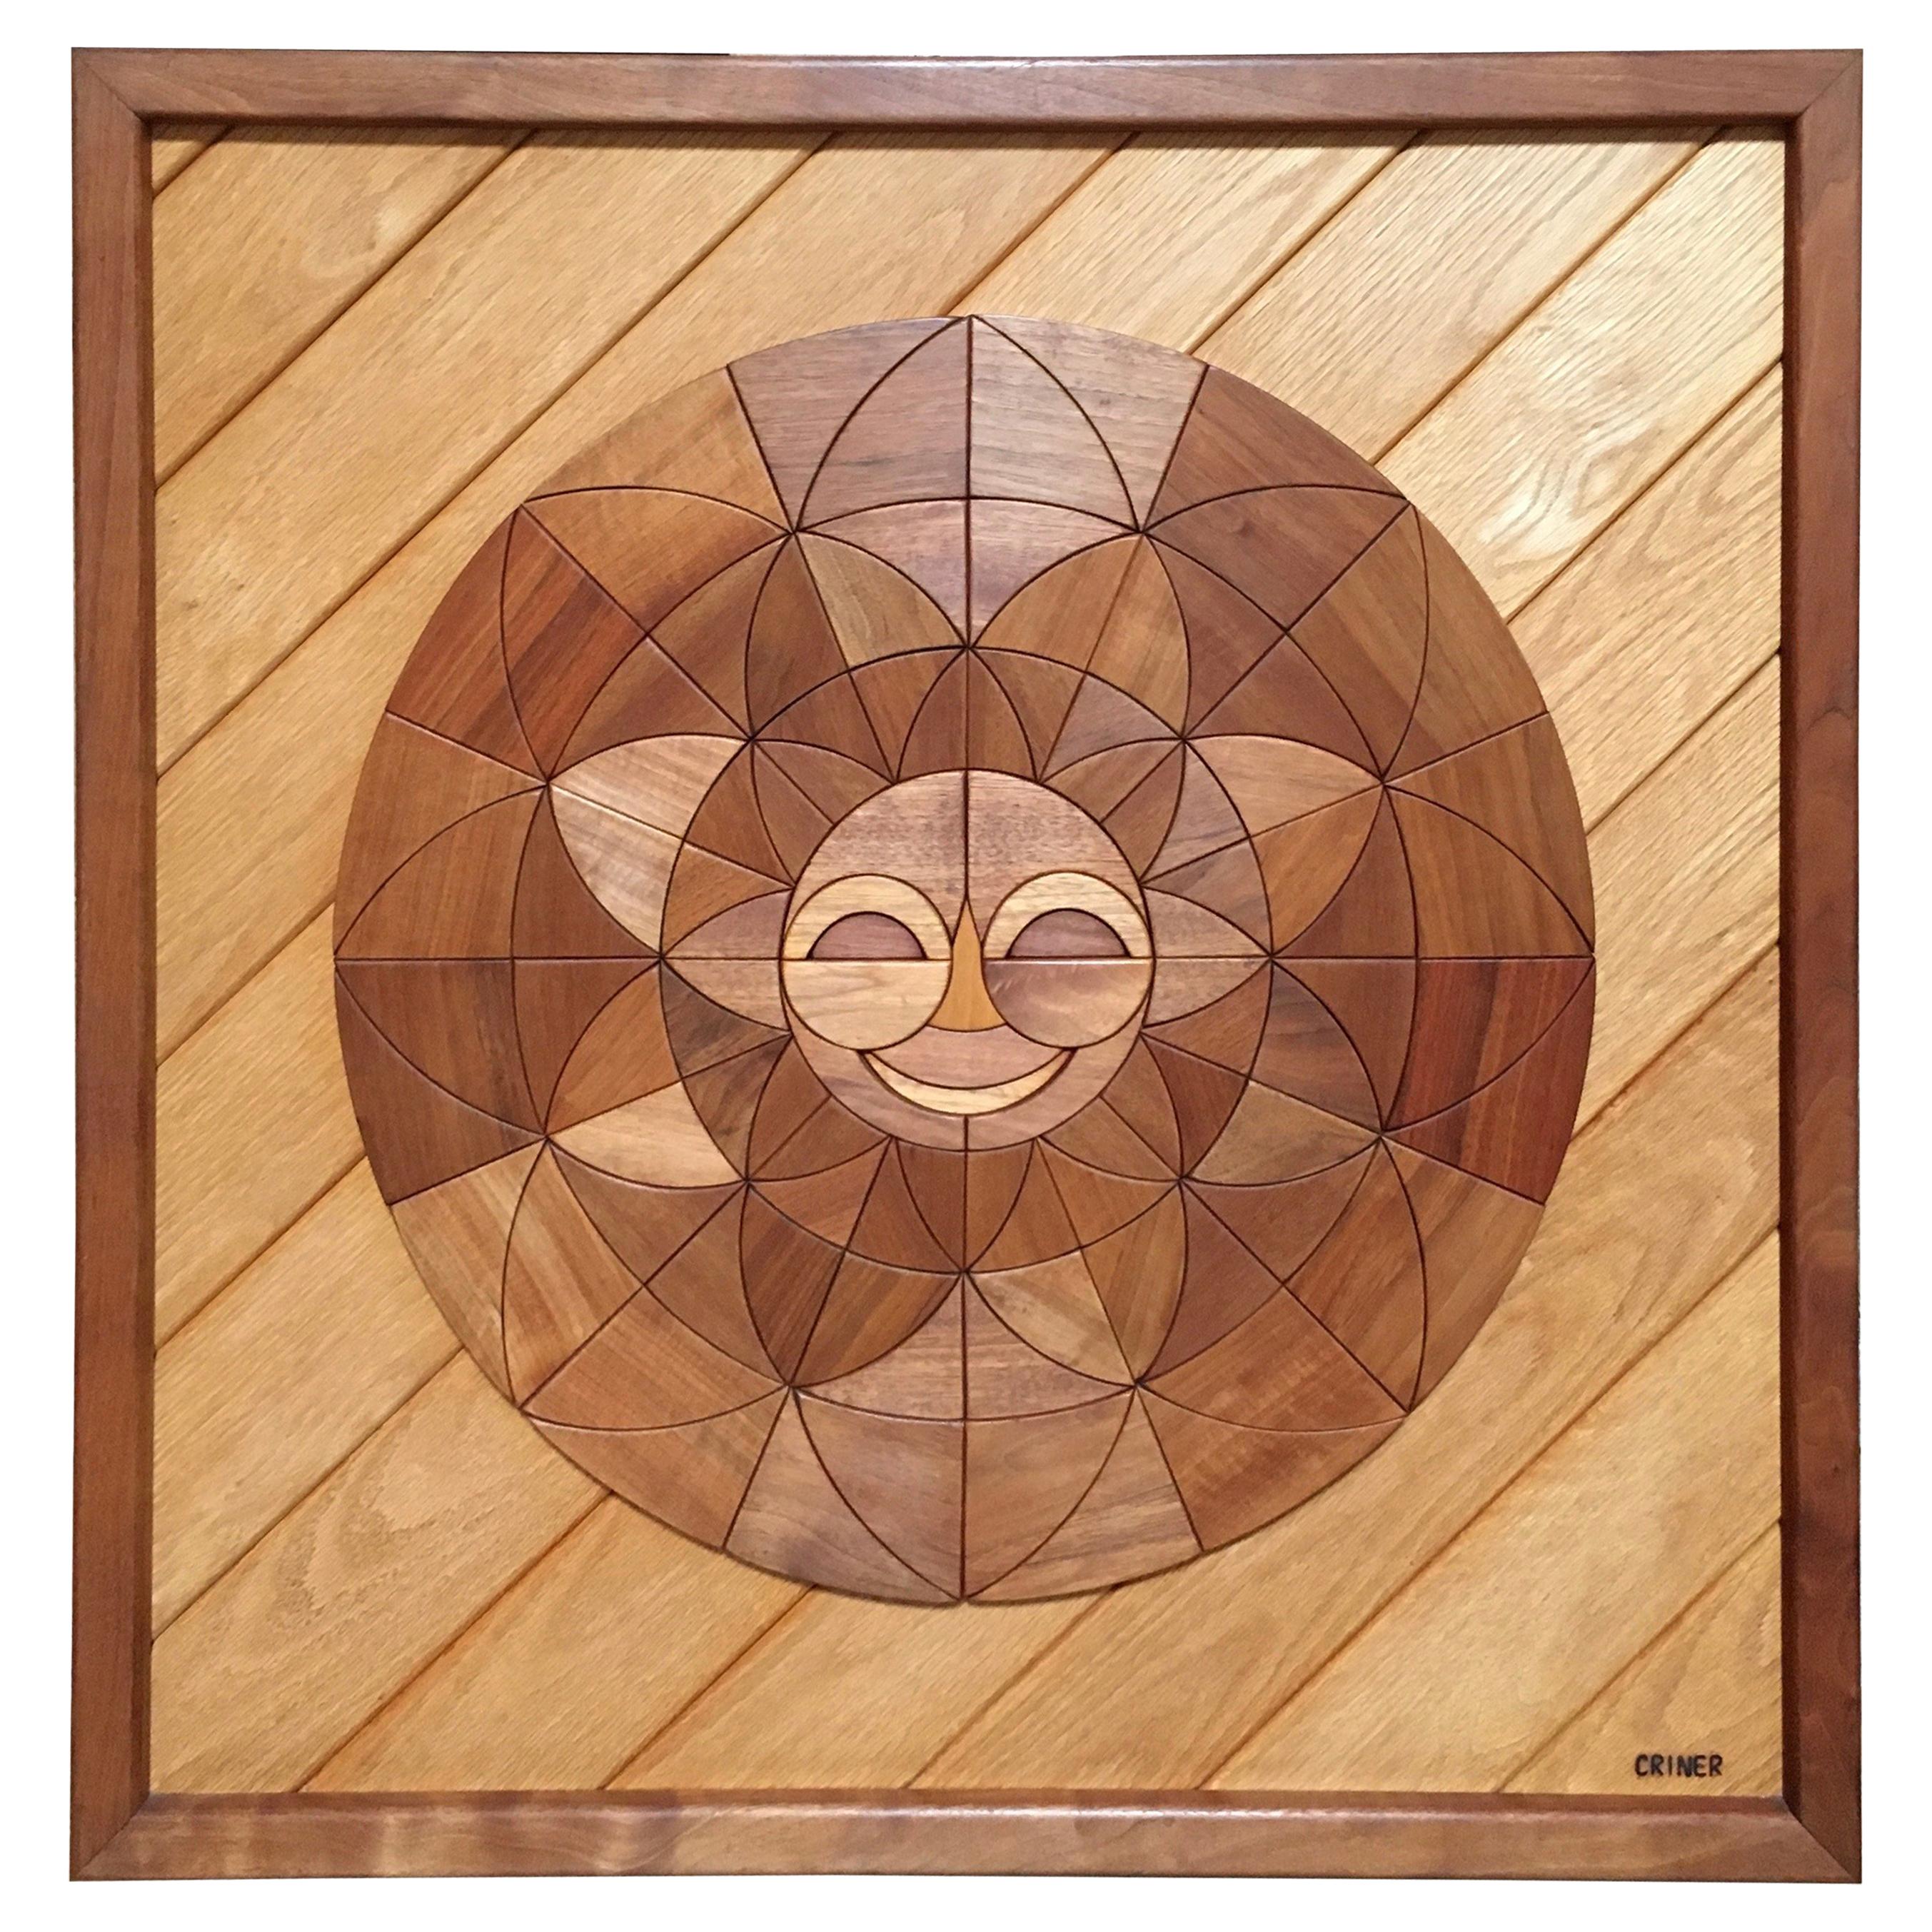 Assemblage of Hardwoods by Dave Criner